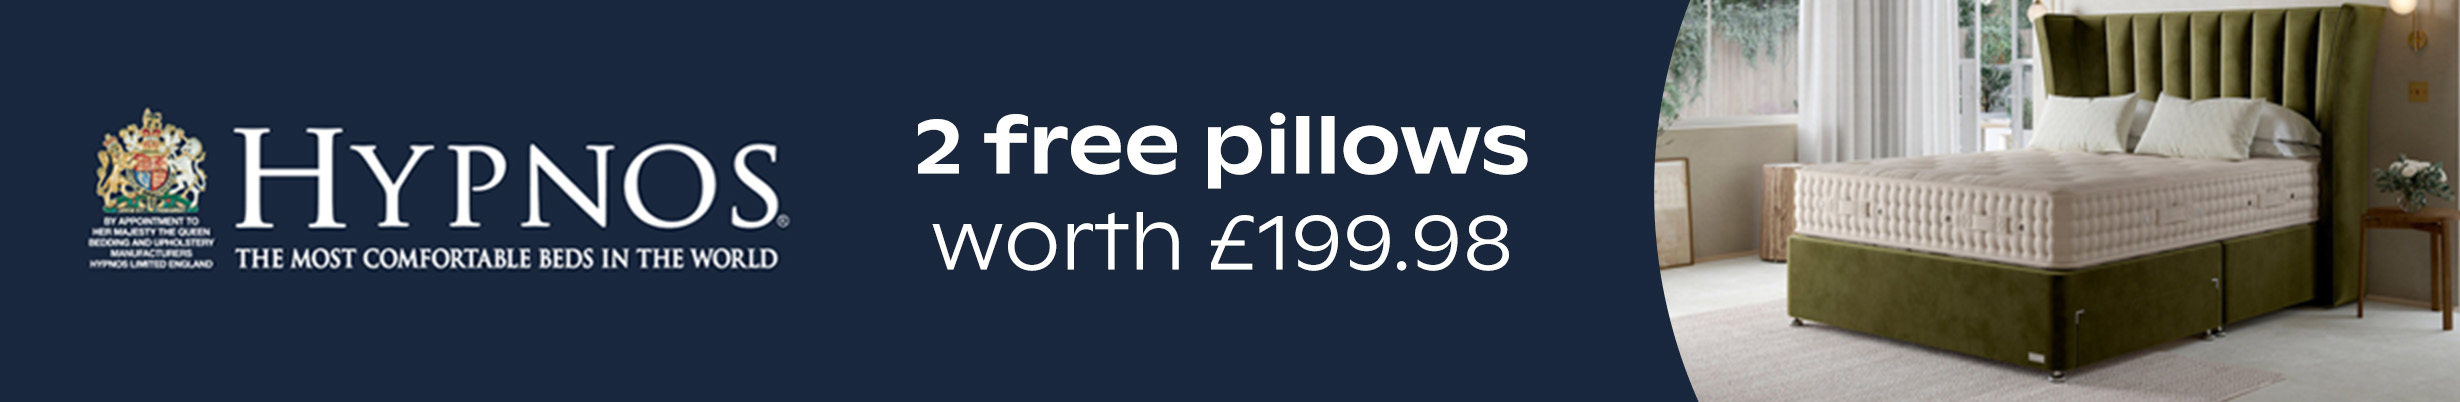 HYPNOS TWO FREE PILLOWS WORTH £199